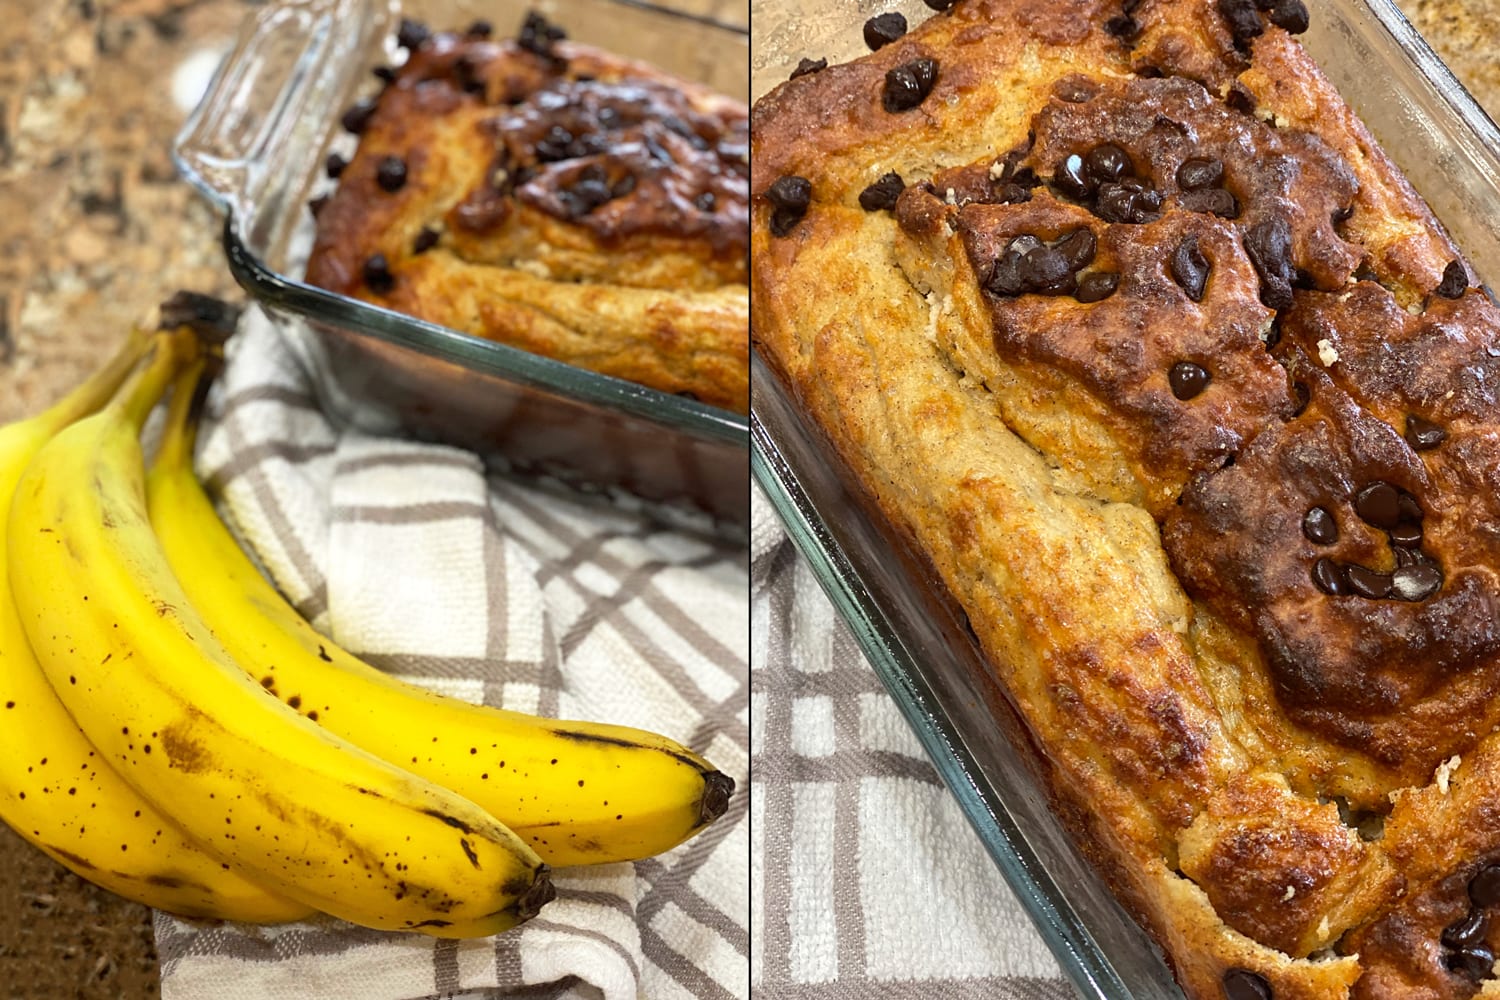 A side by side of bananas and a loaf of chocolate chip banana bread.